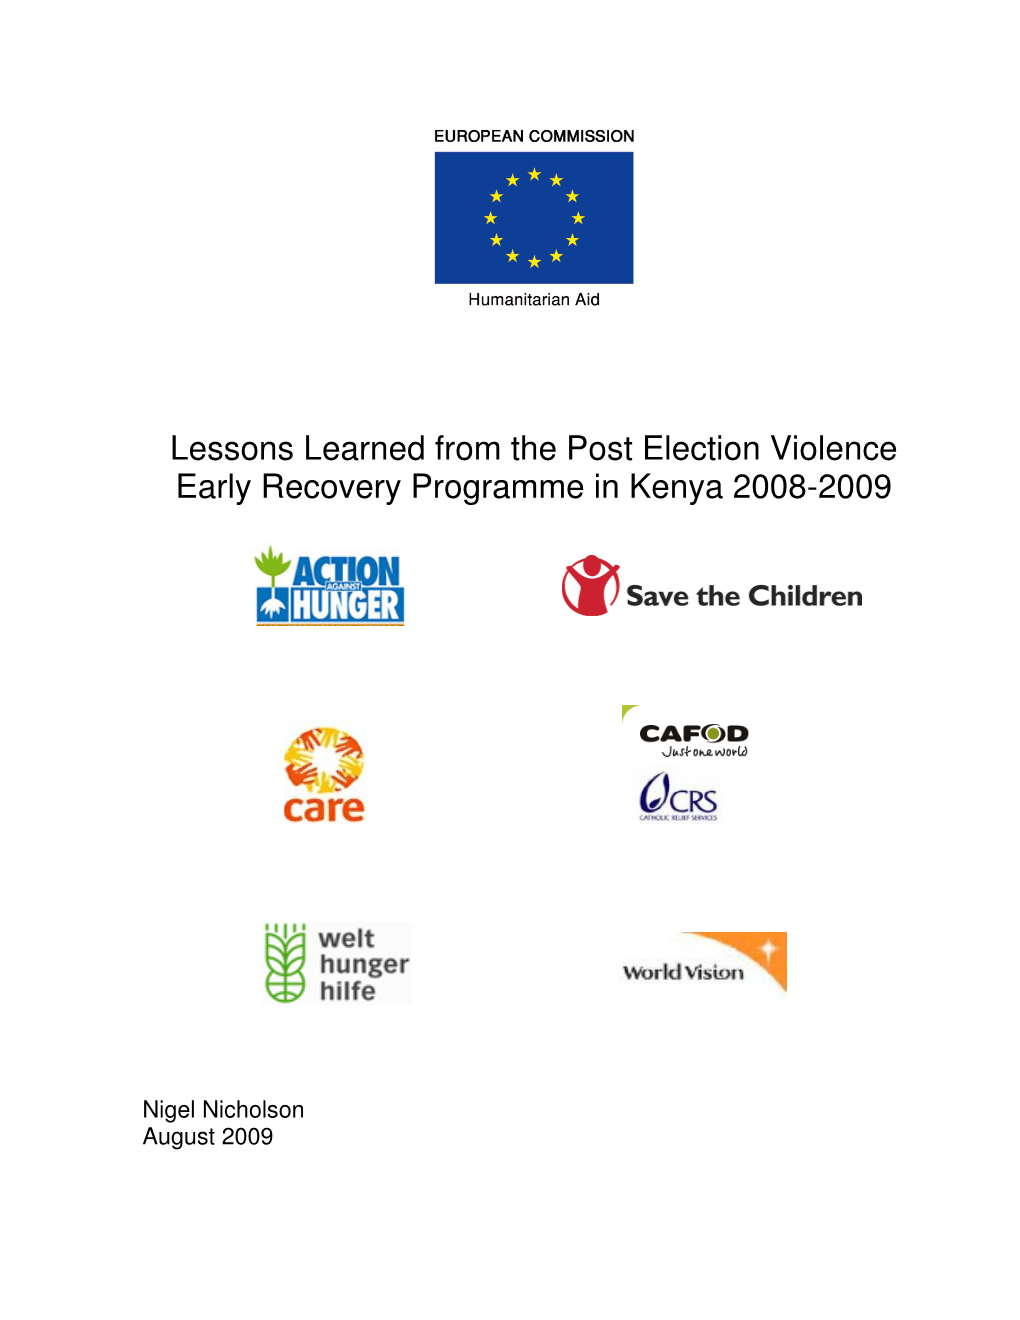 Lessons Learned from the Post Election Violence Early Recovery Programme in Kenya 2008-2009